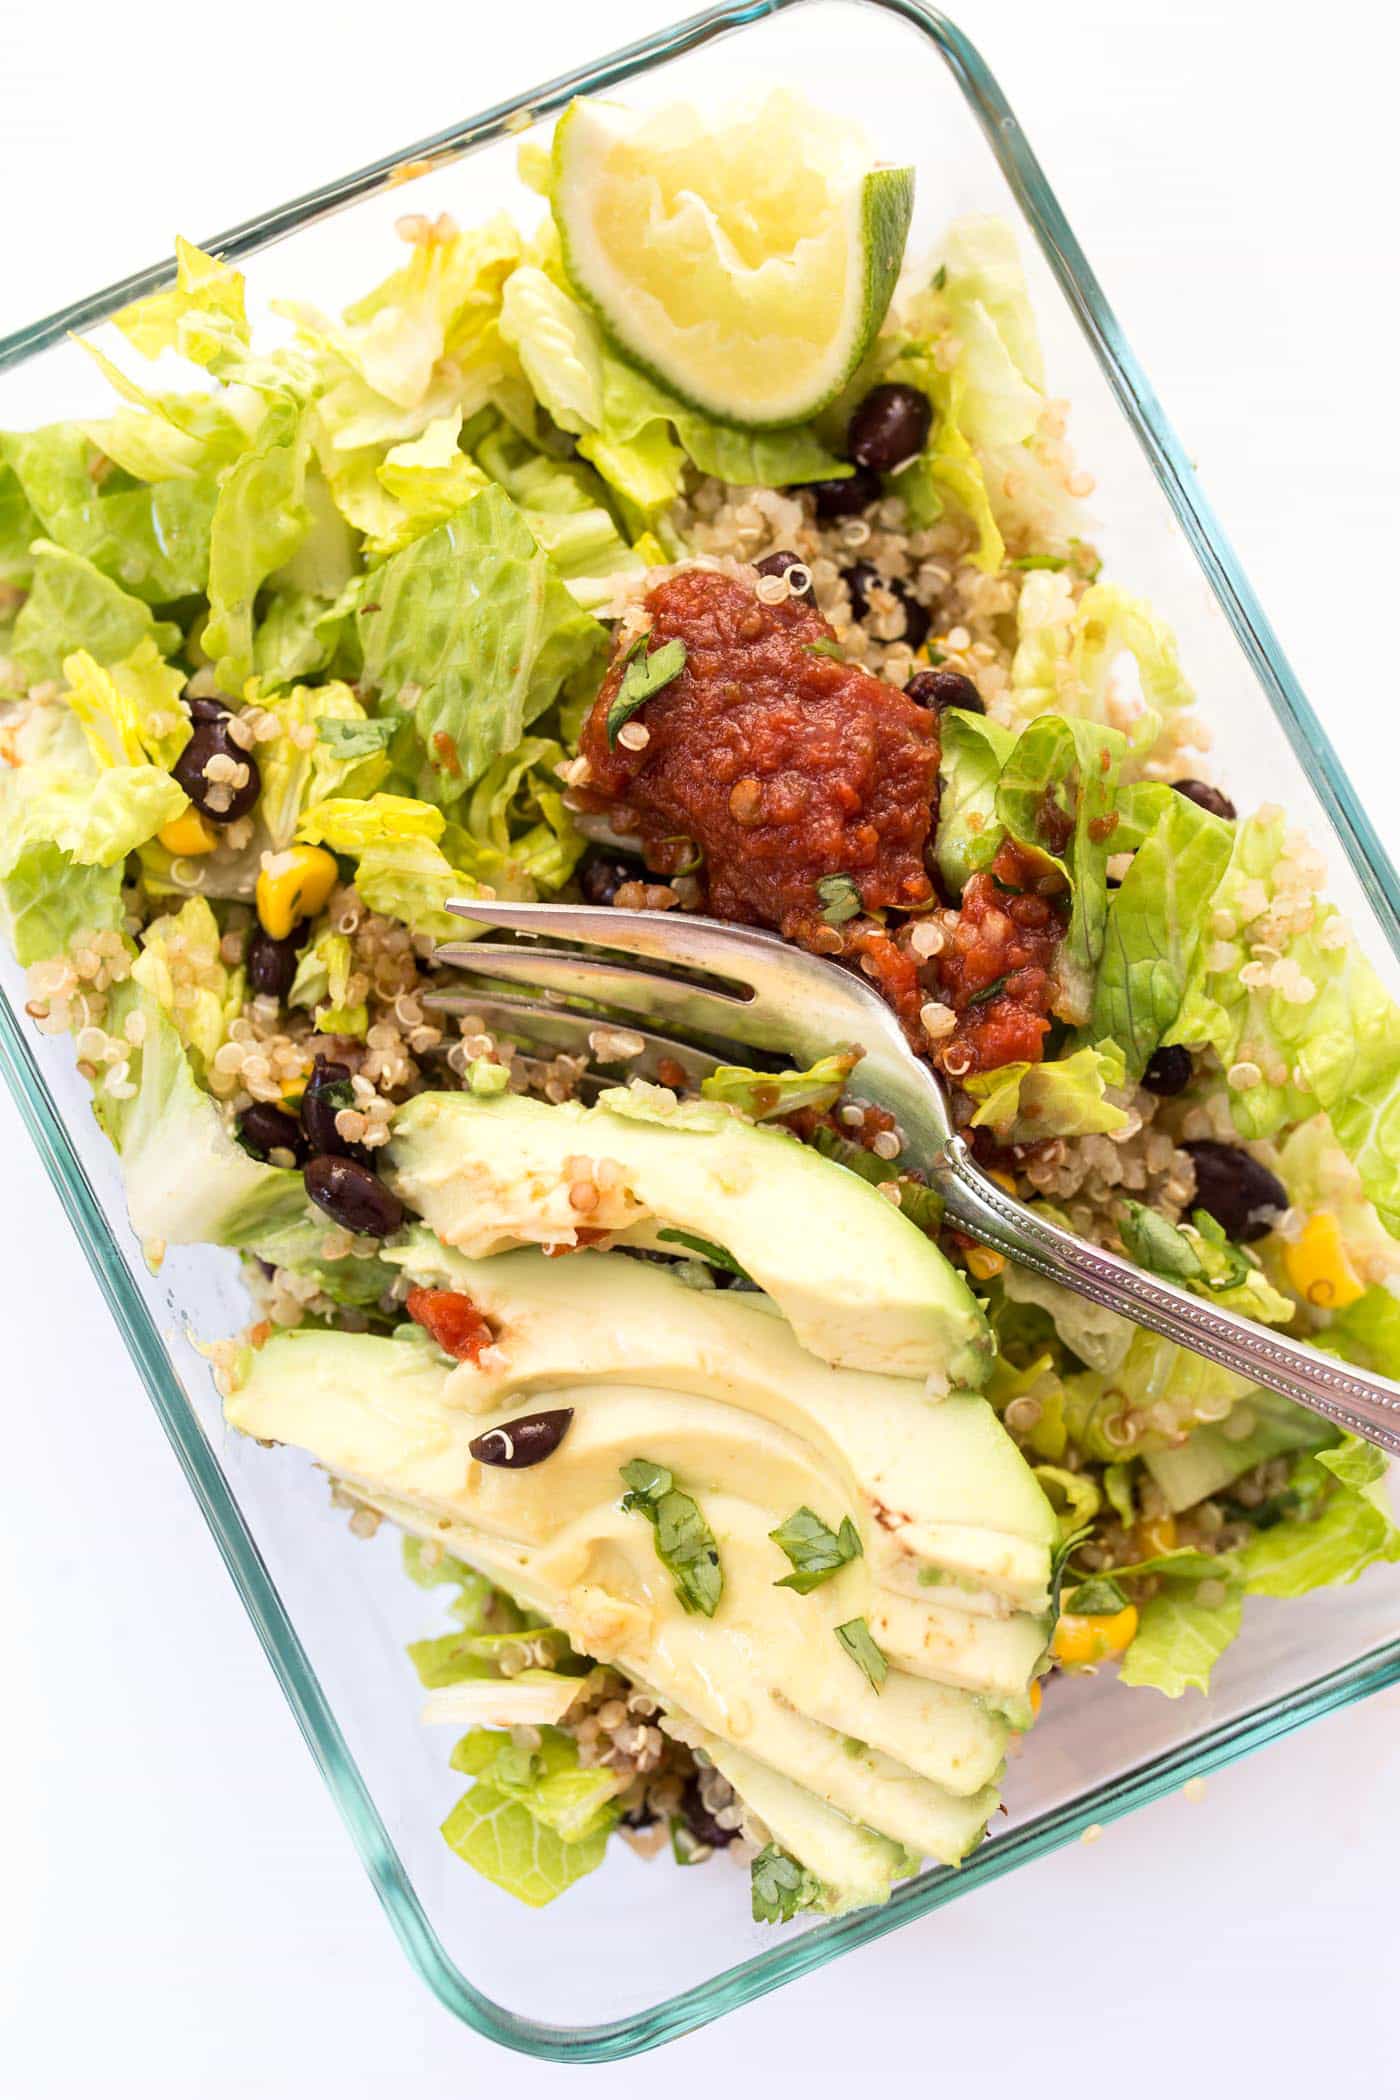 These HEALTHY vegetarian Quinoa Burrito Bowls are perfect for meal prep! Full recipe makes 5 DAYS worth of healthy lunches/dinners!